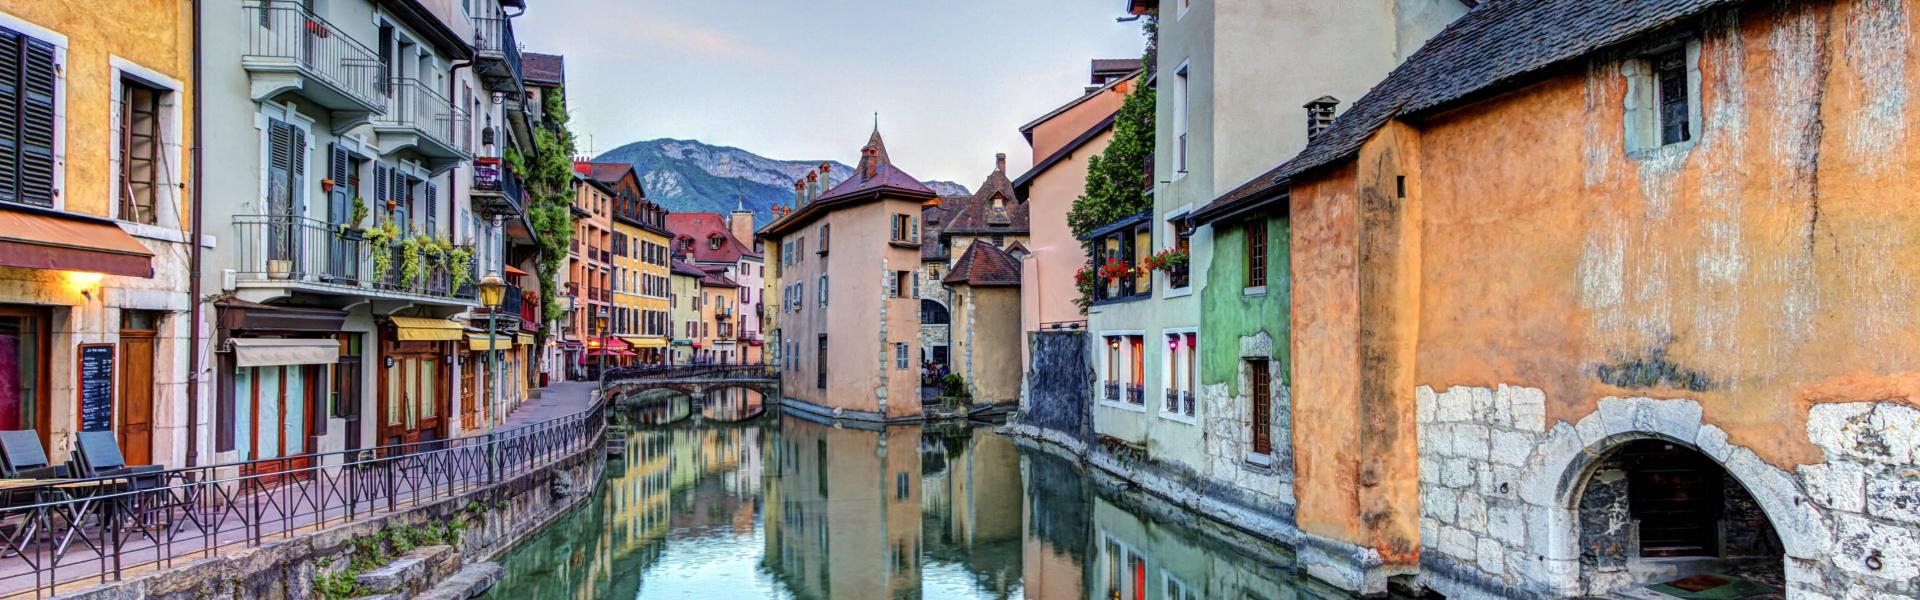 Holiday lettings & accommodation in Annecy - HomeToGo